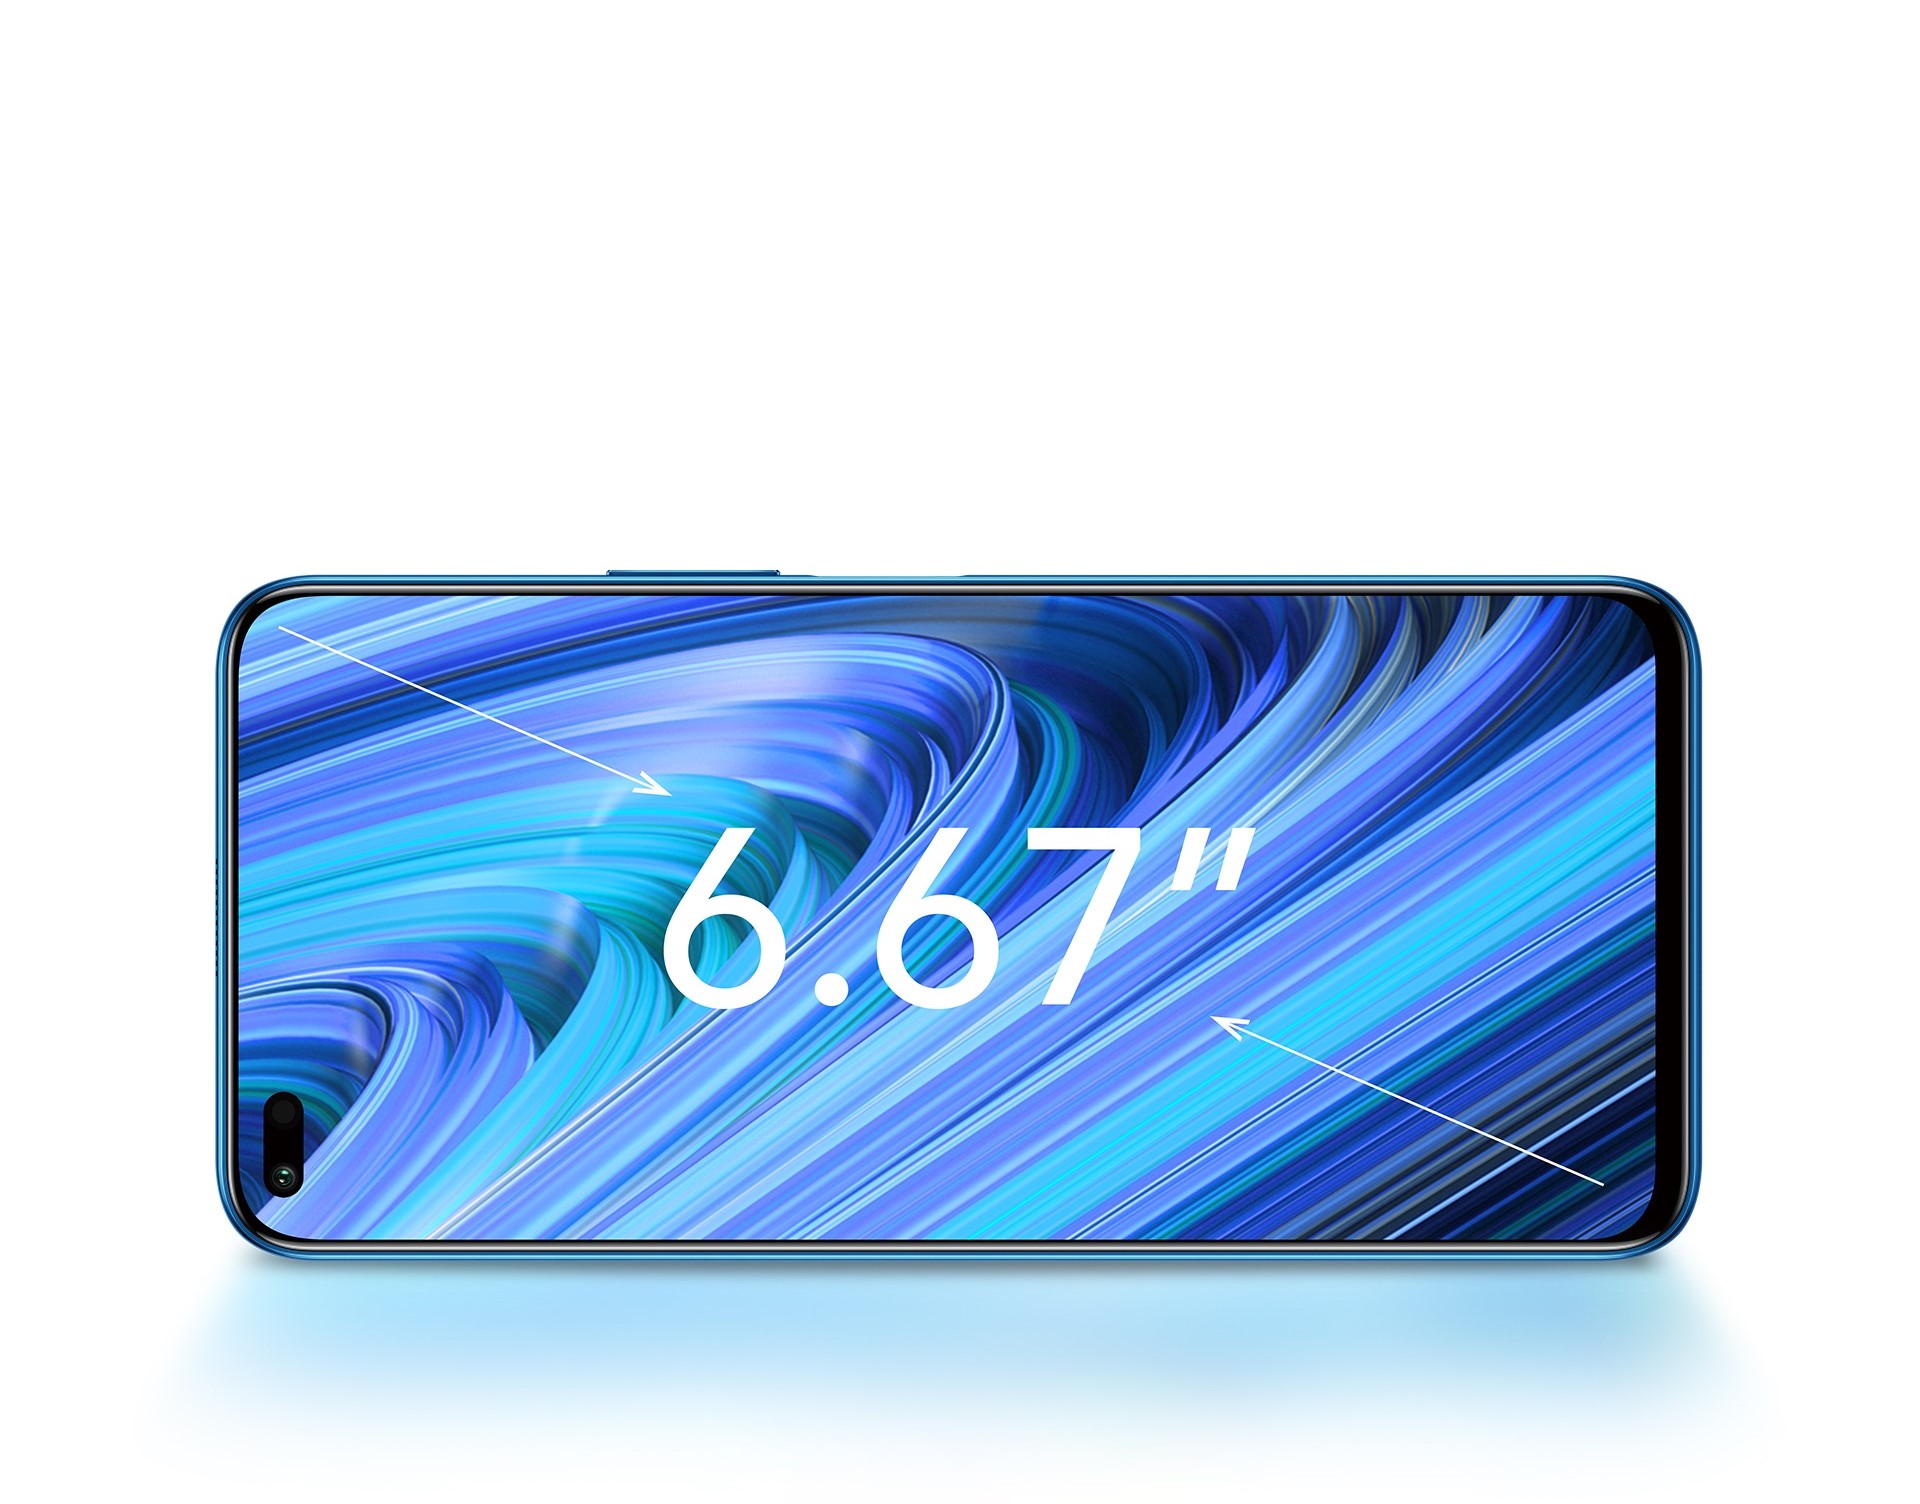 The 6.67" HONOR FullView Display features automatic colour temperature conversion and brightness adjustment for a realistic and comfortable viewing experience